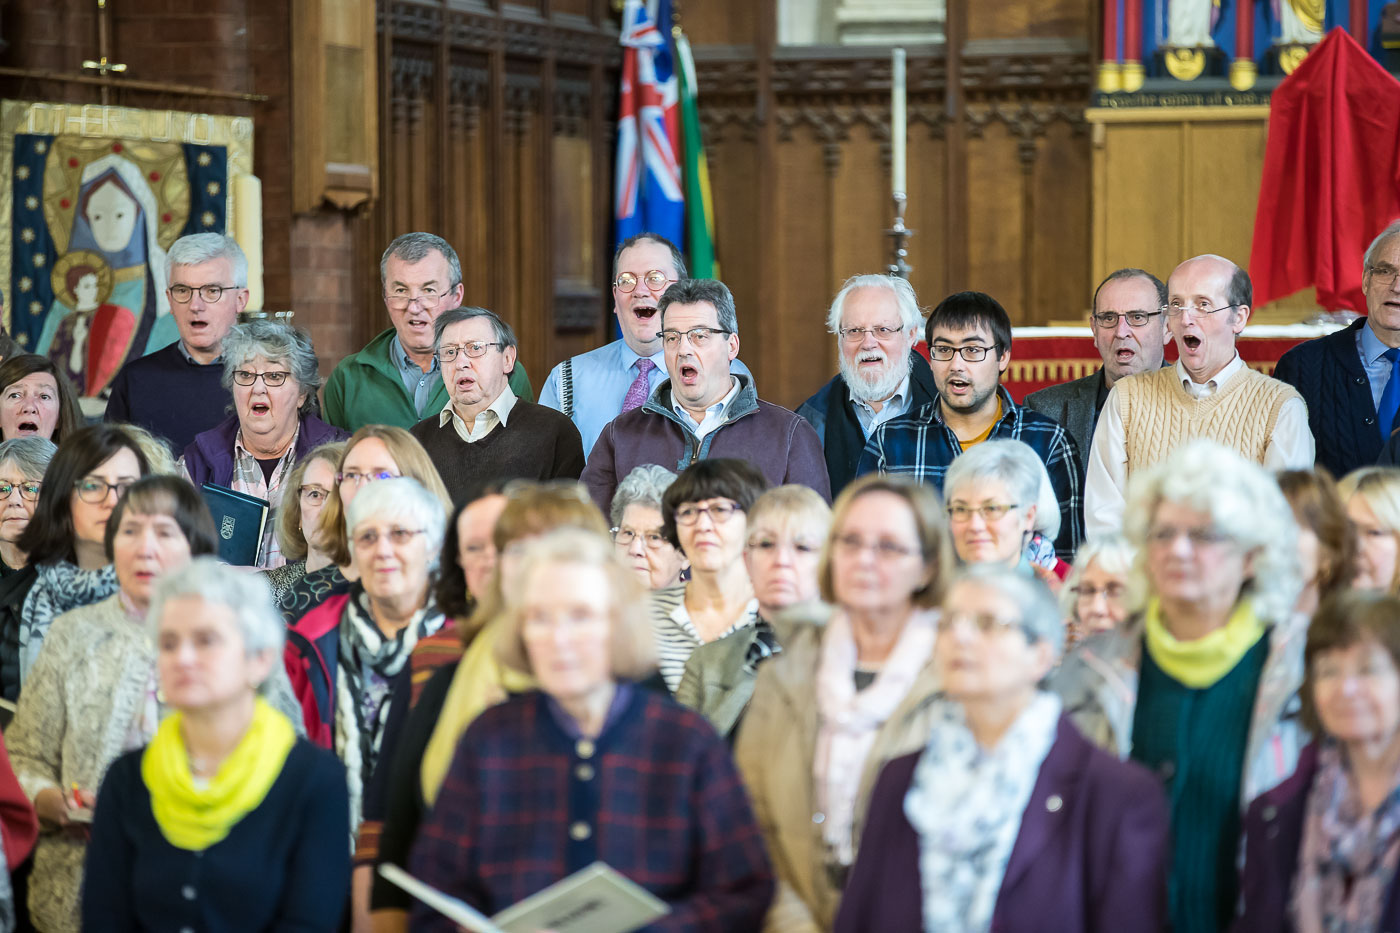 Come and Sing rehearsal, March 2018